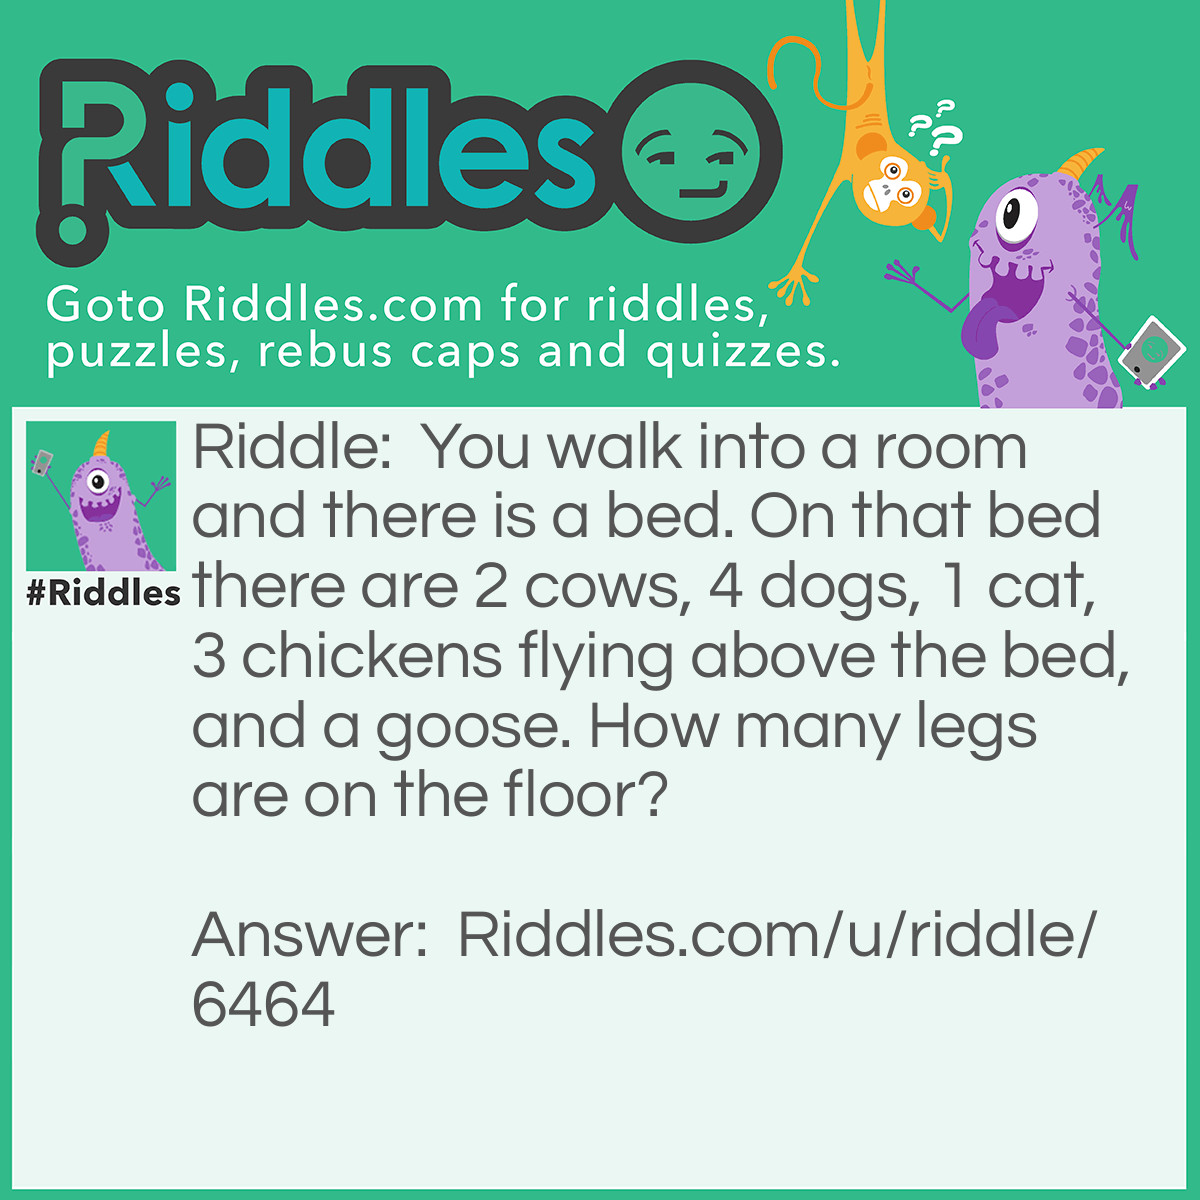 Riddle: You walk into a room and there is a bed. On that bed there are 2 cows, 4 dogs, 1 cat, 3 chickens flying above the bed, and a goose. How many legs are on the floor? Answer: 6, the bed' s legs and yours.